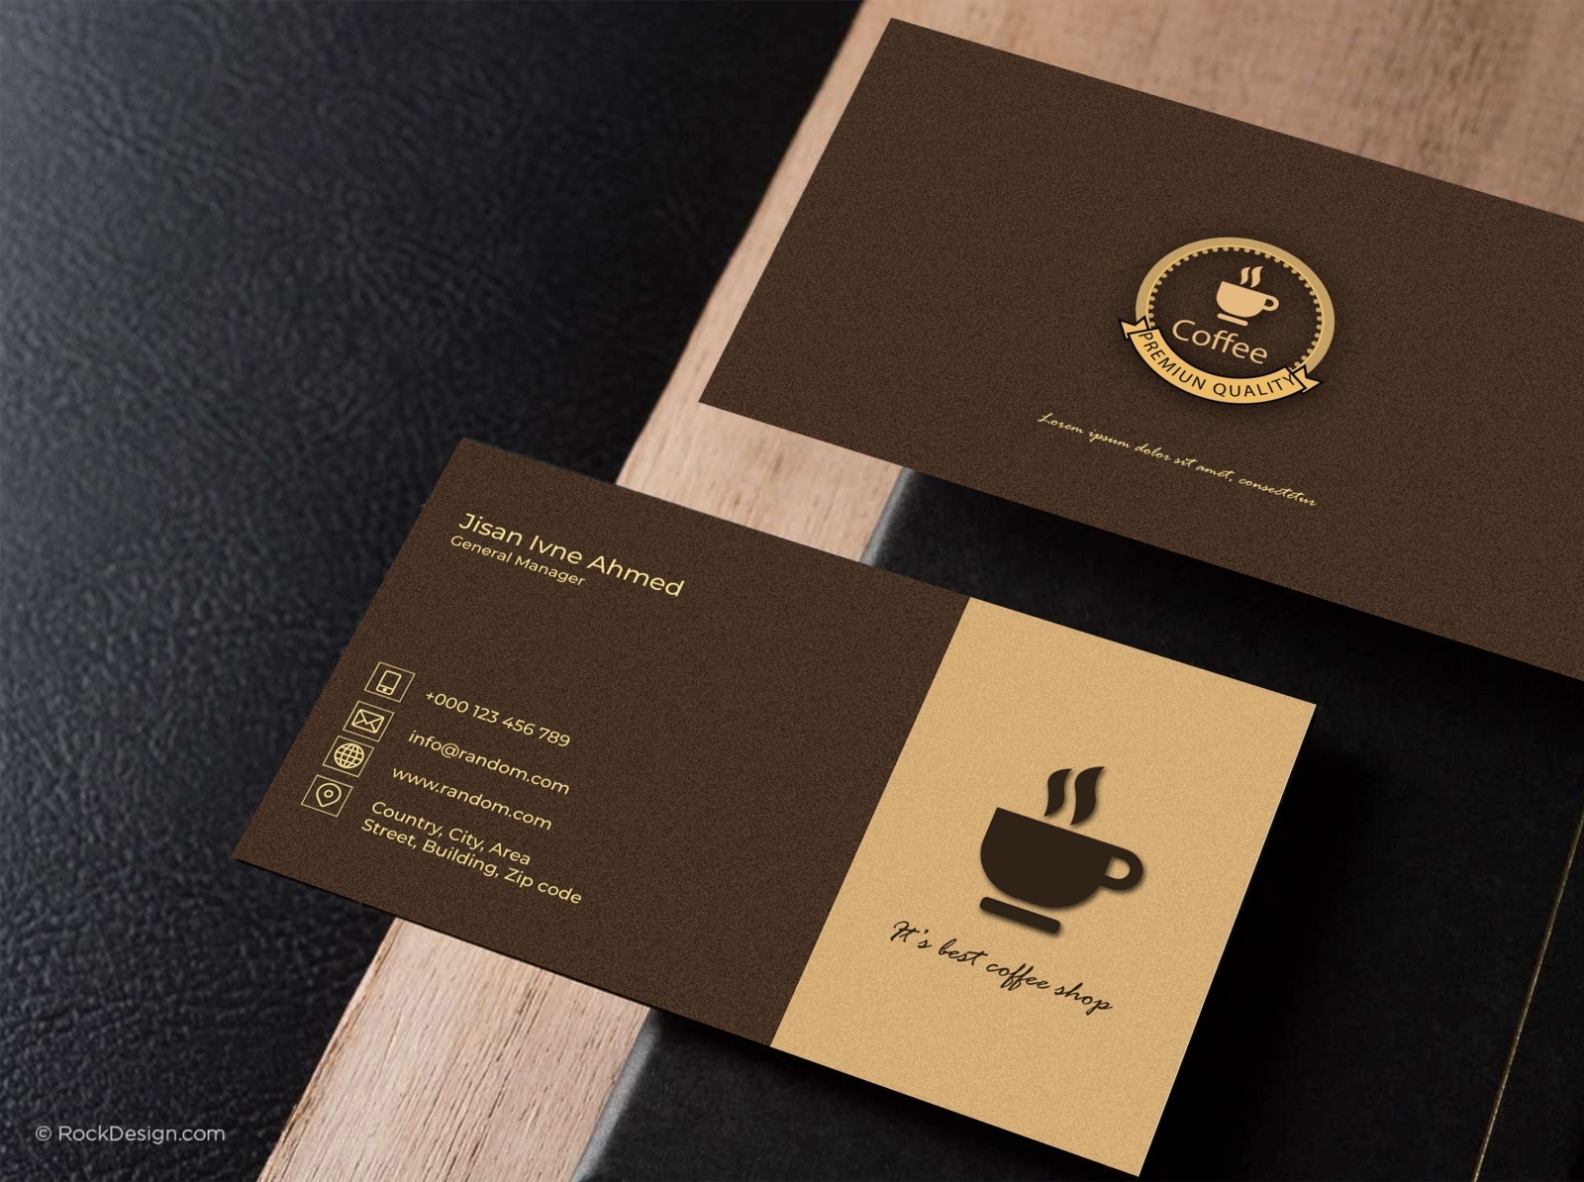 Coffee Shop Contact Business Card Design Template By Md Mahmud Hasan On Intended For Coffee Business Card Template Free